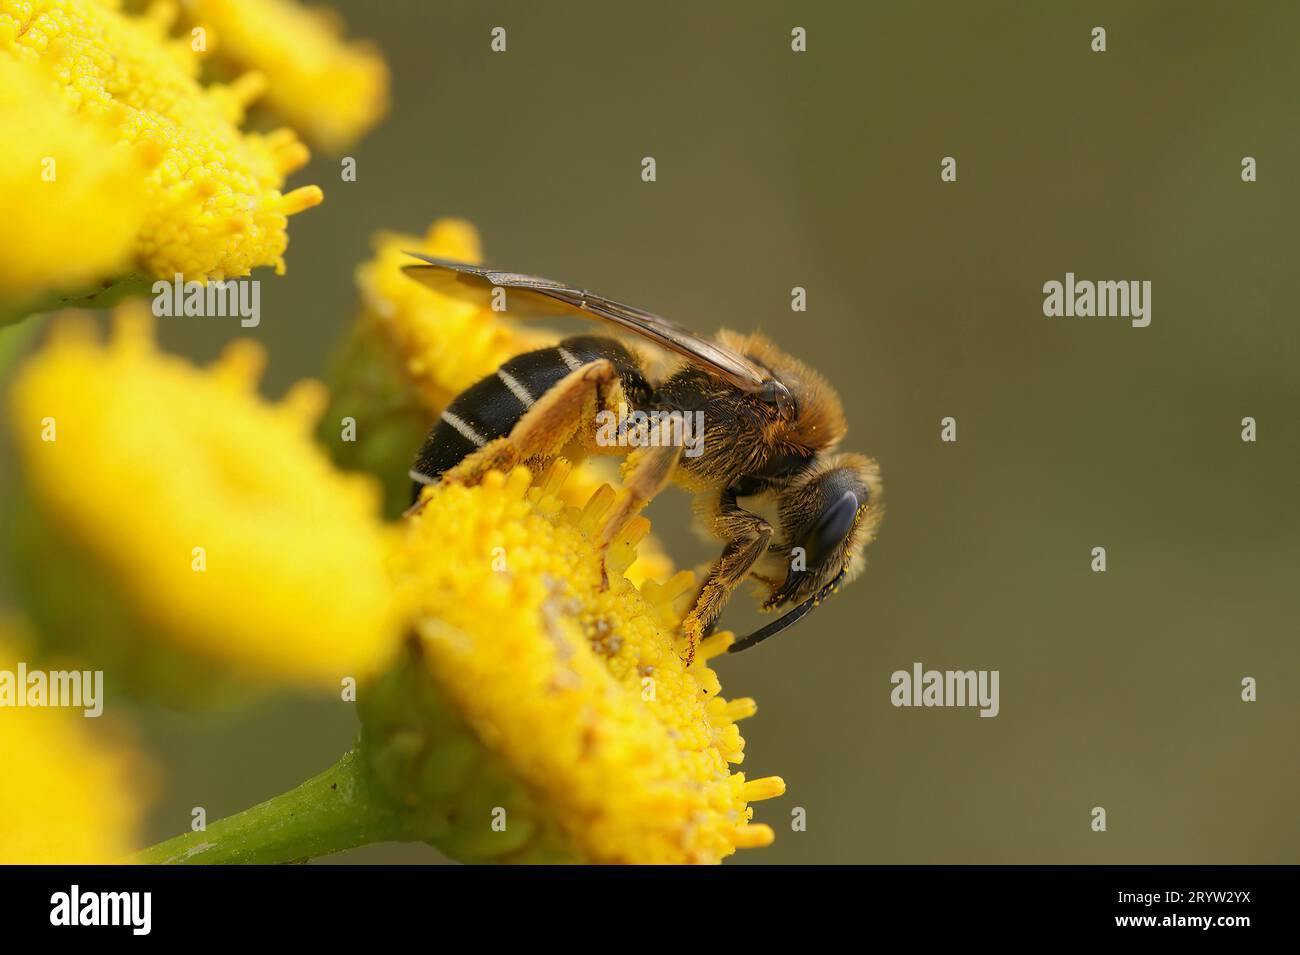 Natural closeup on a Red-legged furrow bee, Halictus rubicundus sitting on a yellow Tansy flower, Tanacetum vulgare Stock Photo